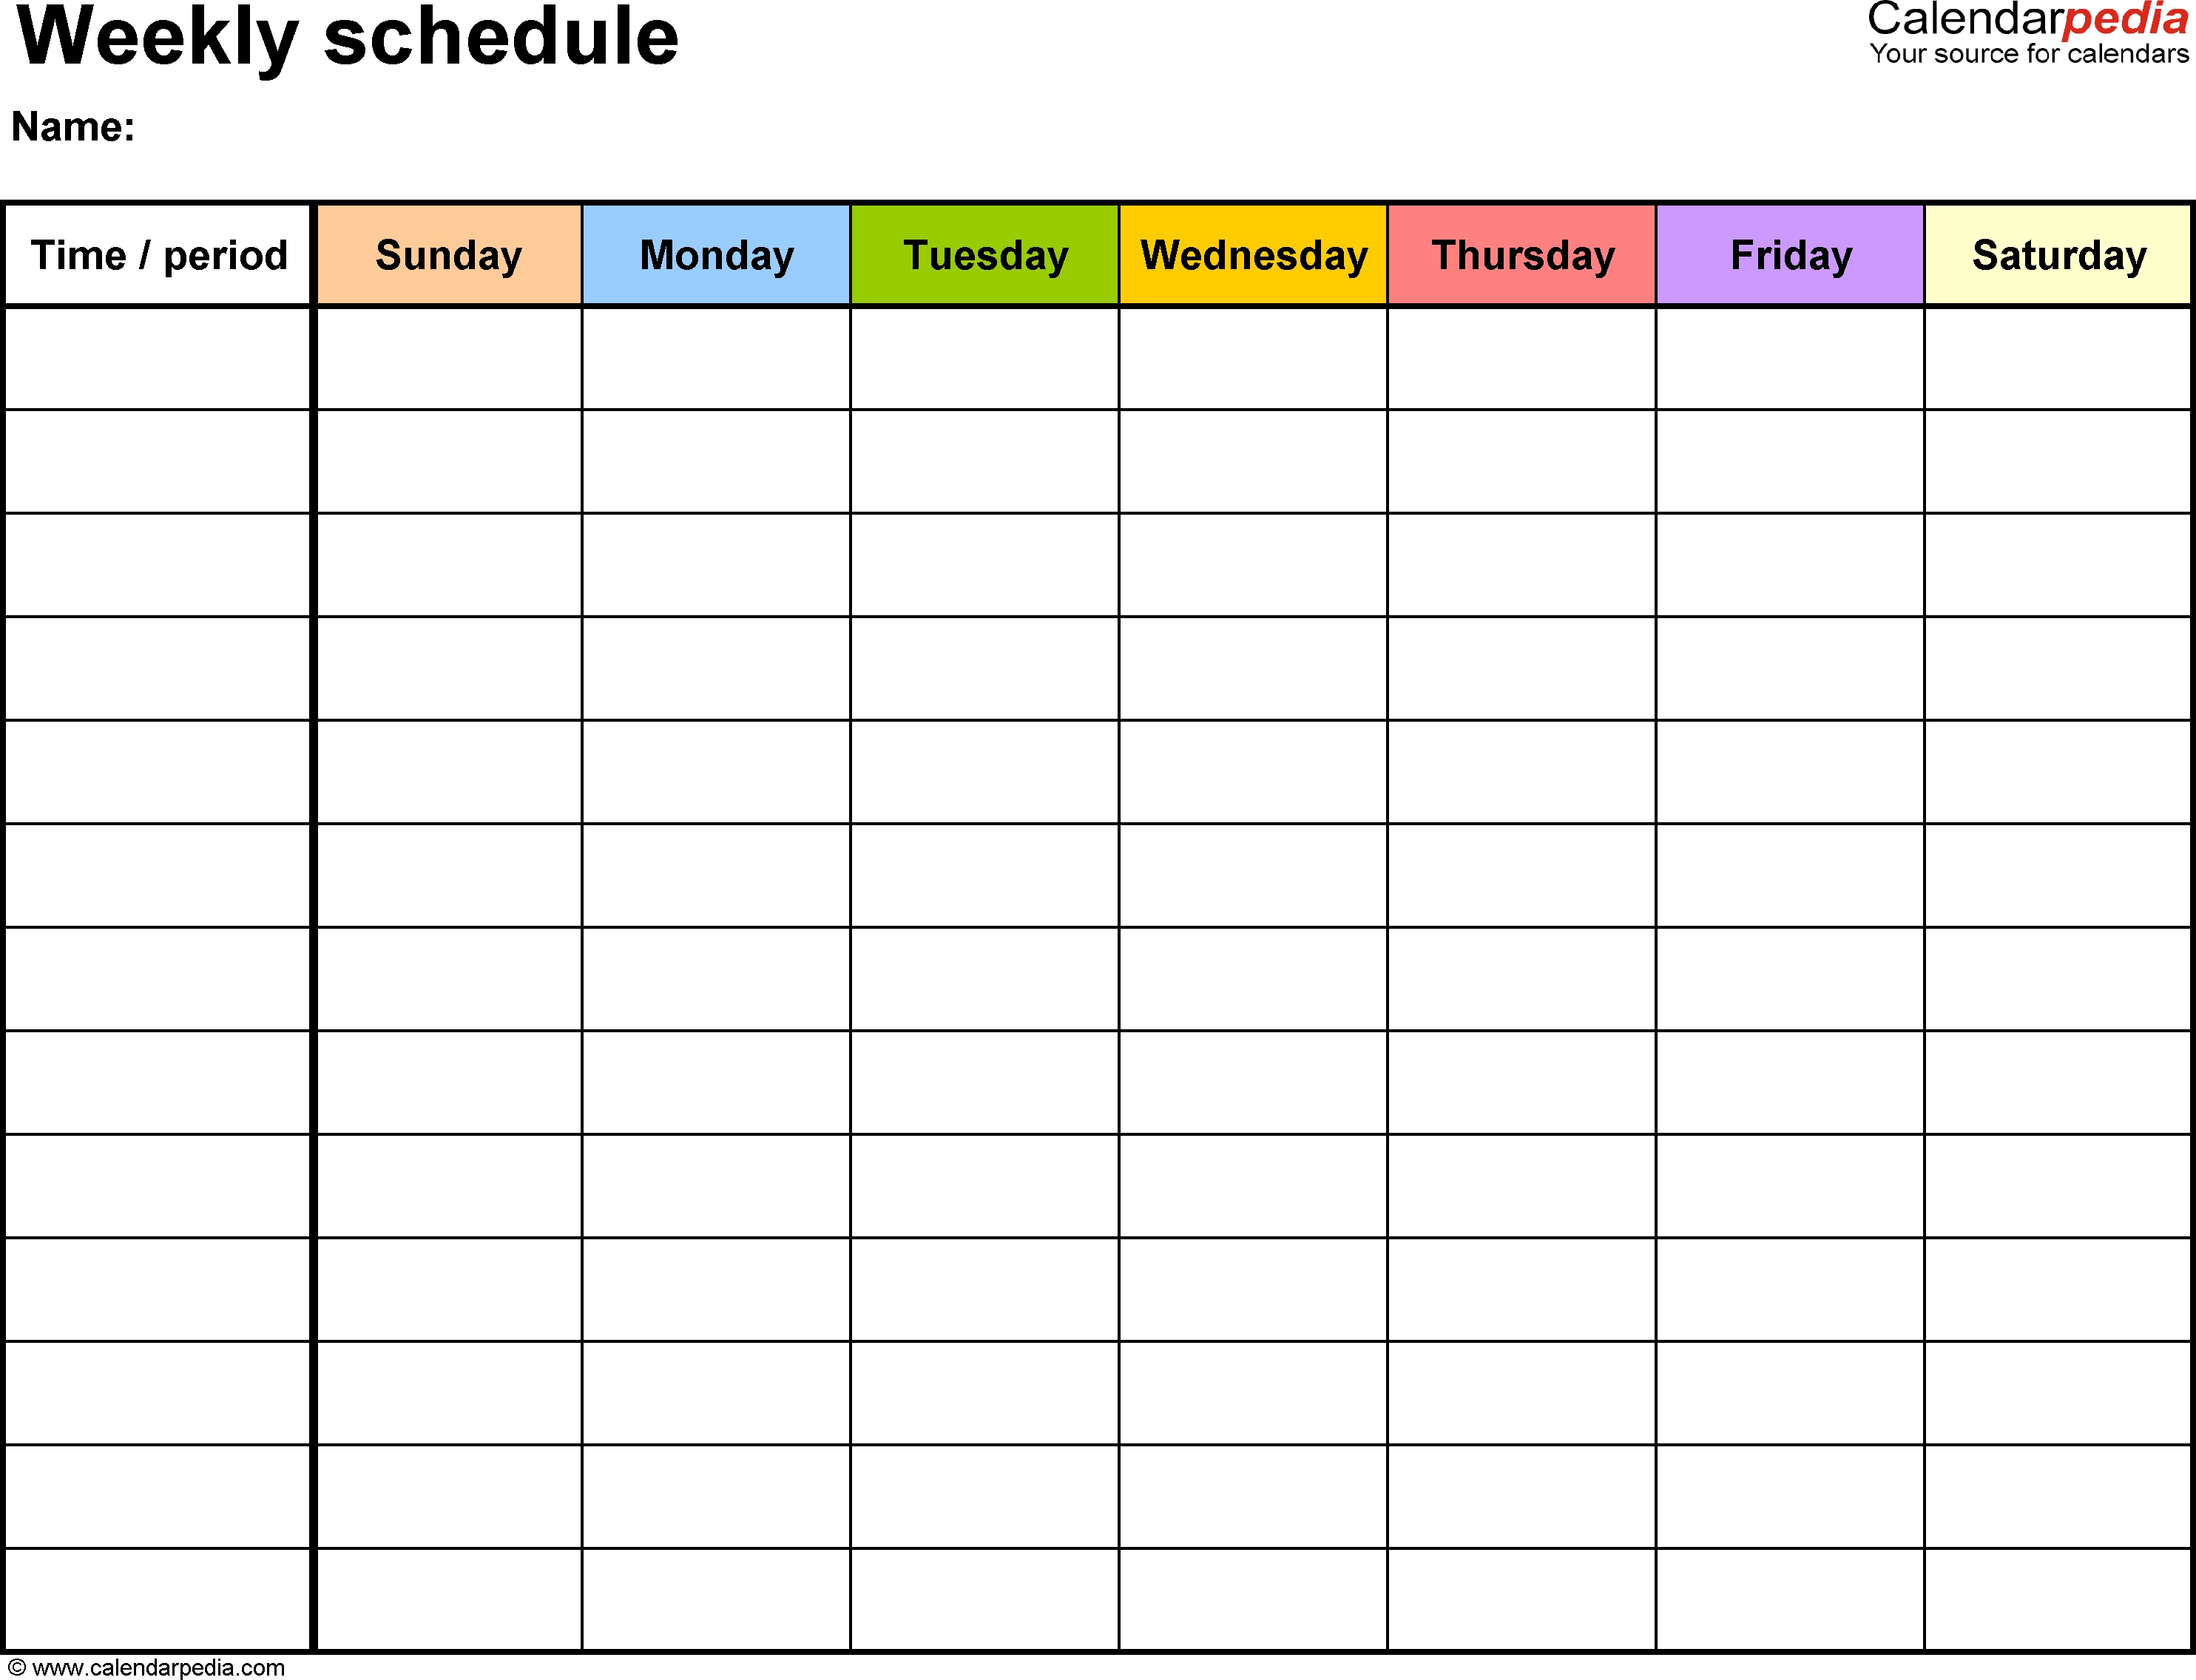 Weekly Schedule Template For Word Version 13: Landscape, 1